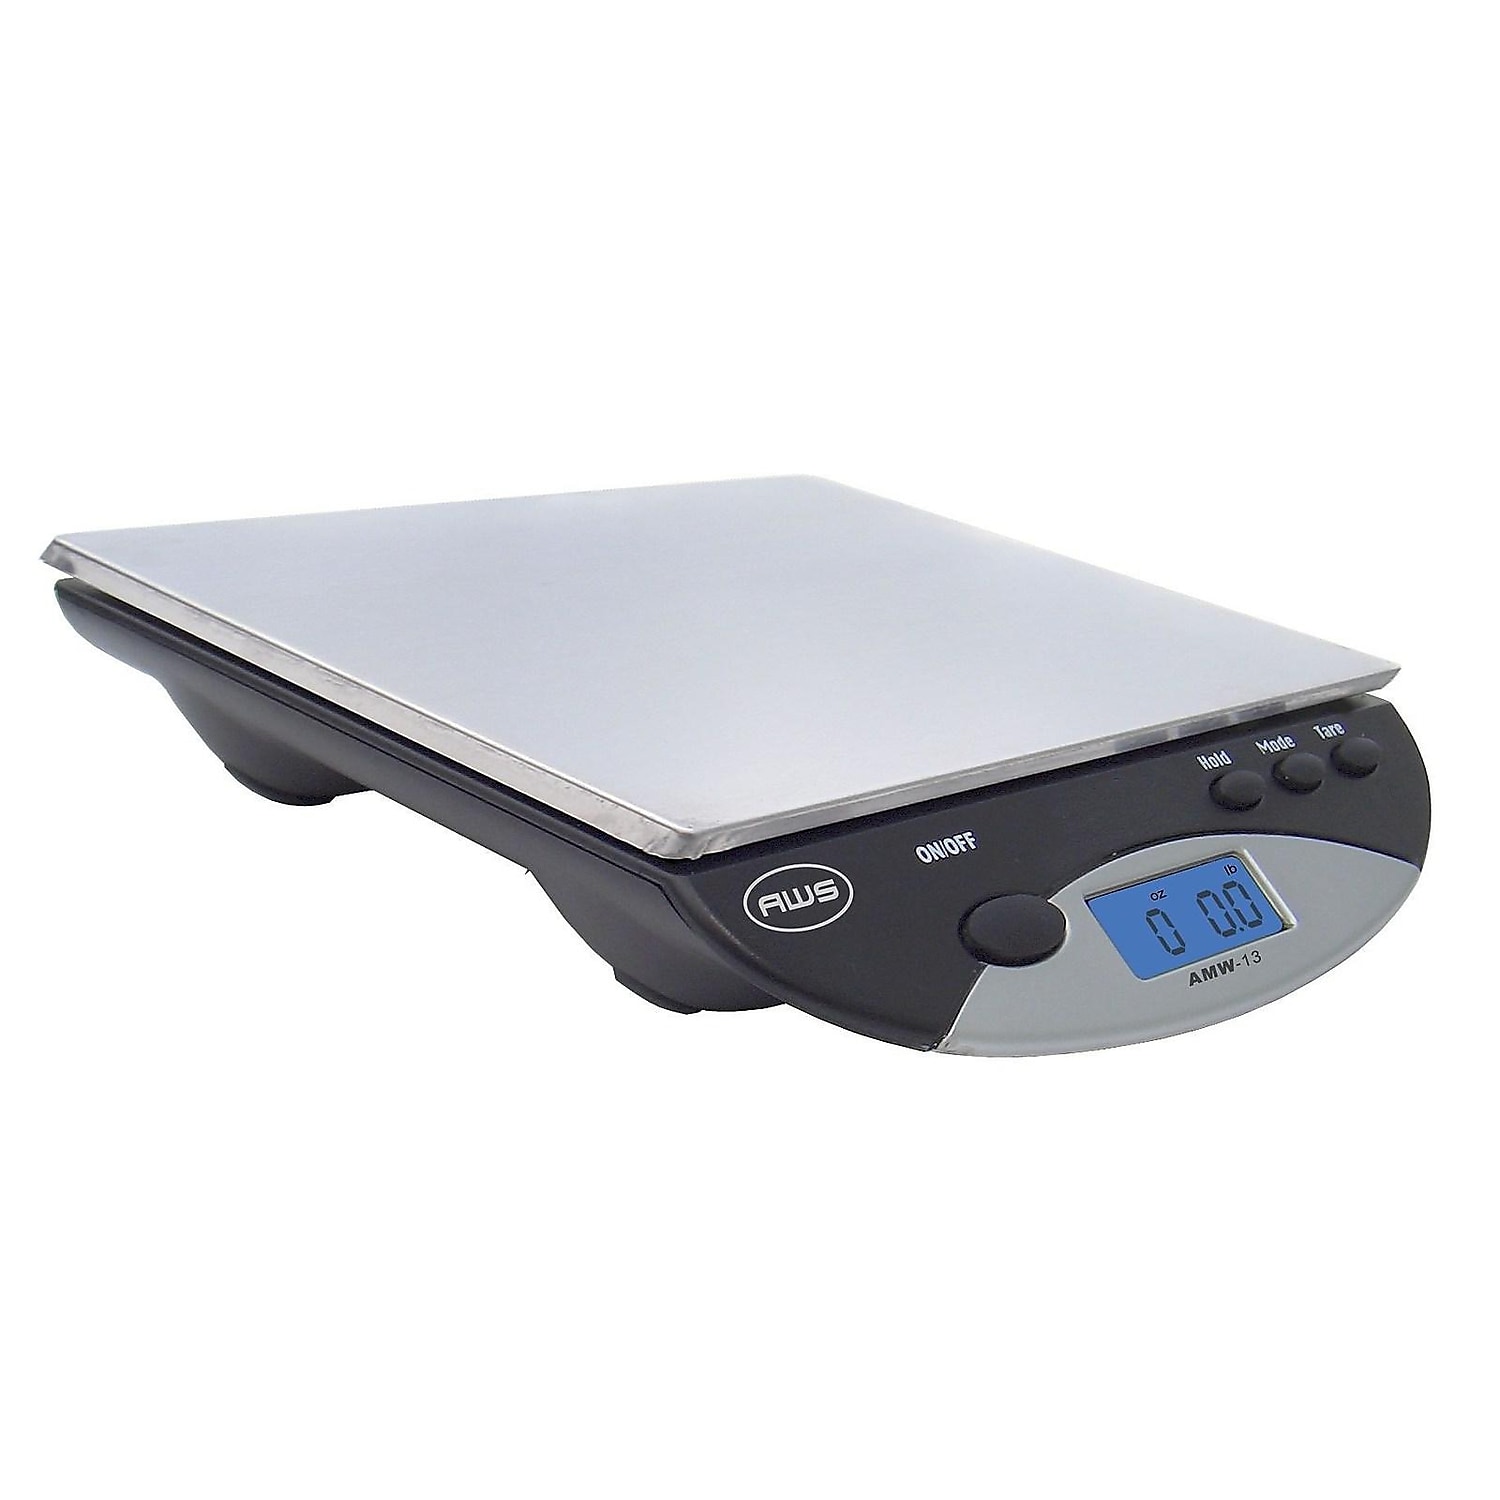 AMERICAN WEIGH SCALES Digital Postal Scale Kitchen Scale with Backlit LCD, 13lbs/6kgs Black - image 1 of 7